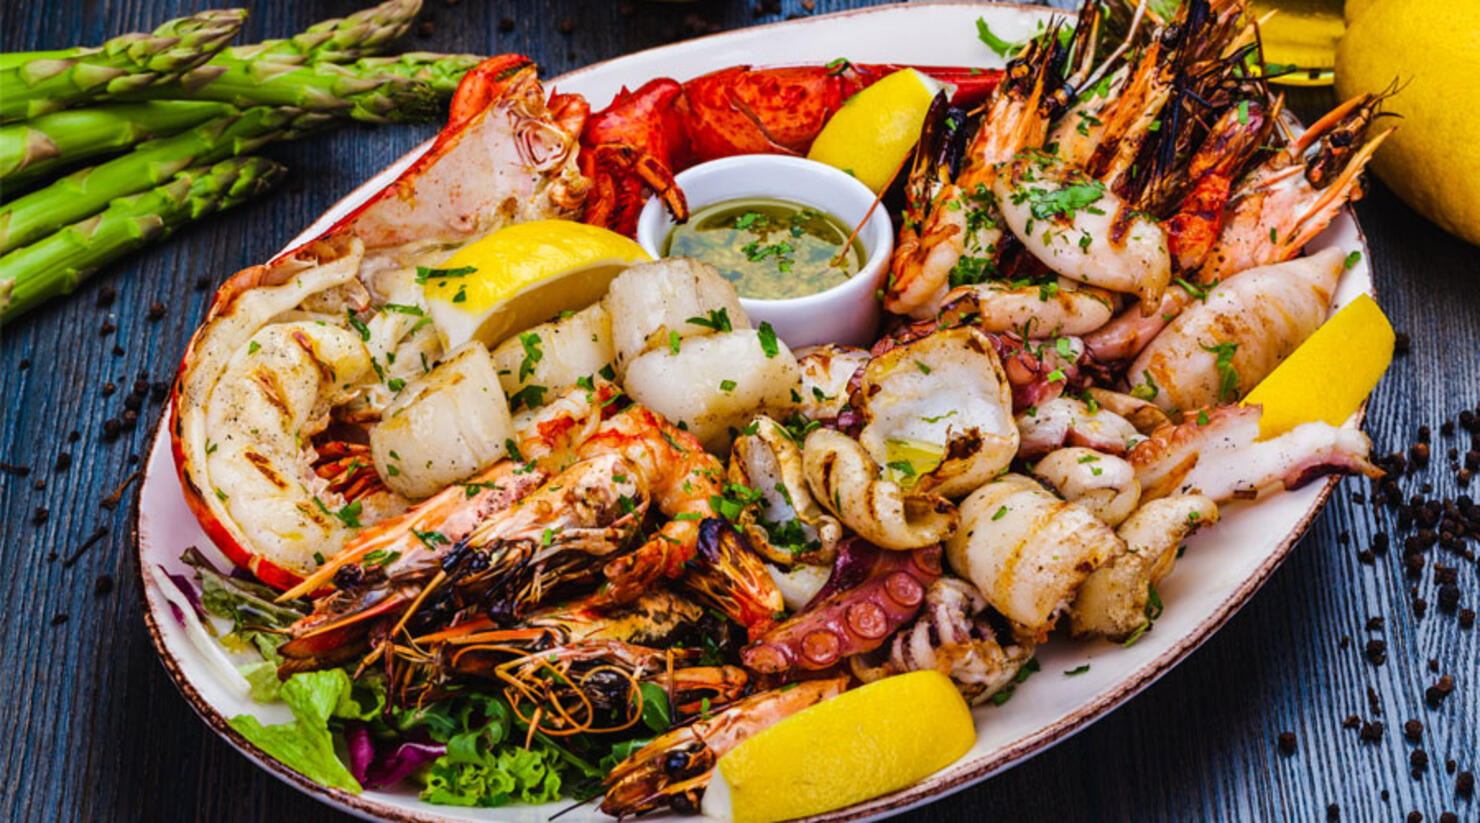 This California Seafood Restaurant Is The Best In The Whole State